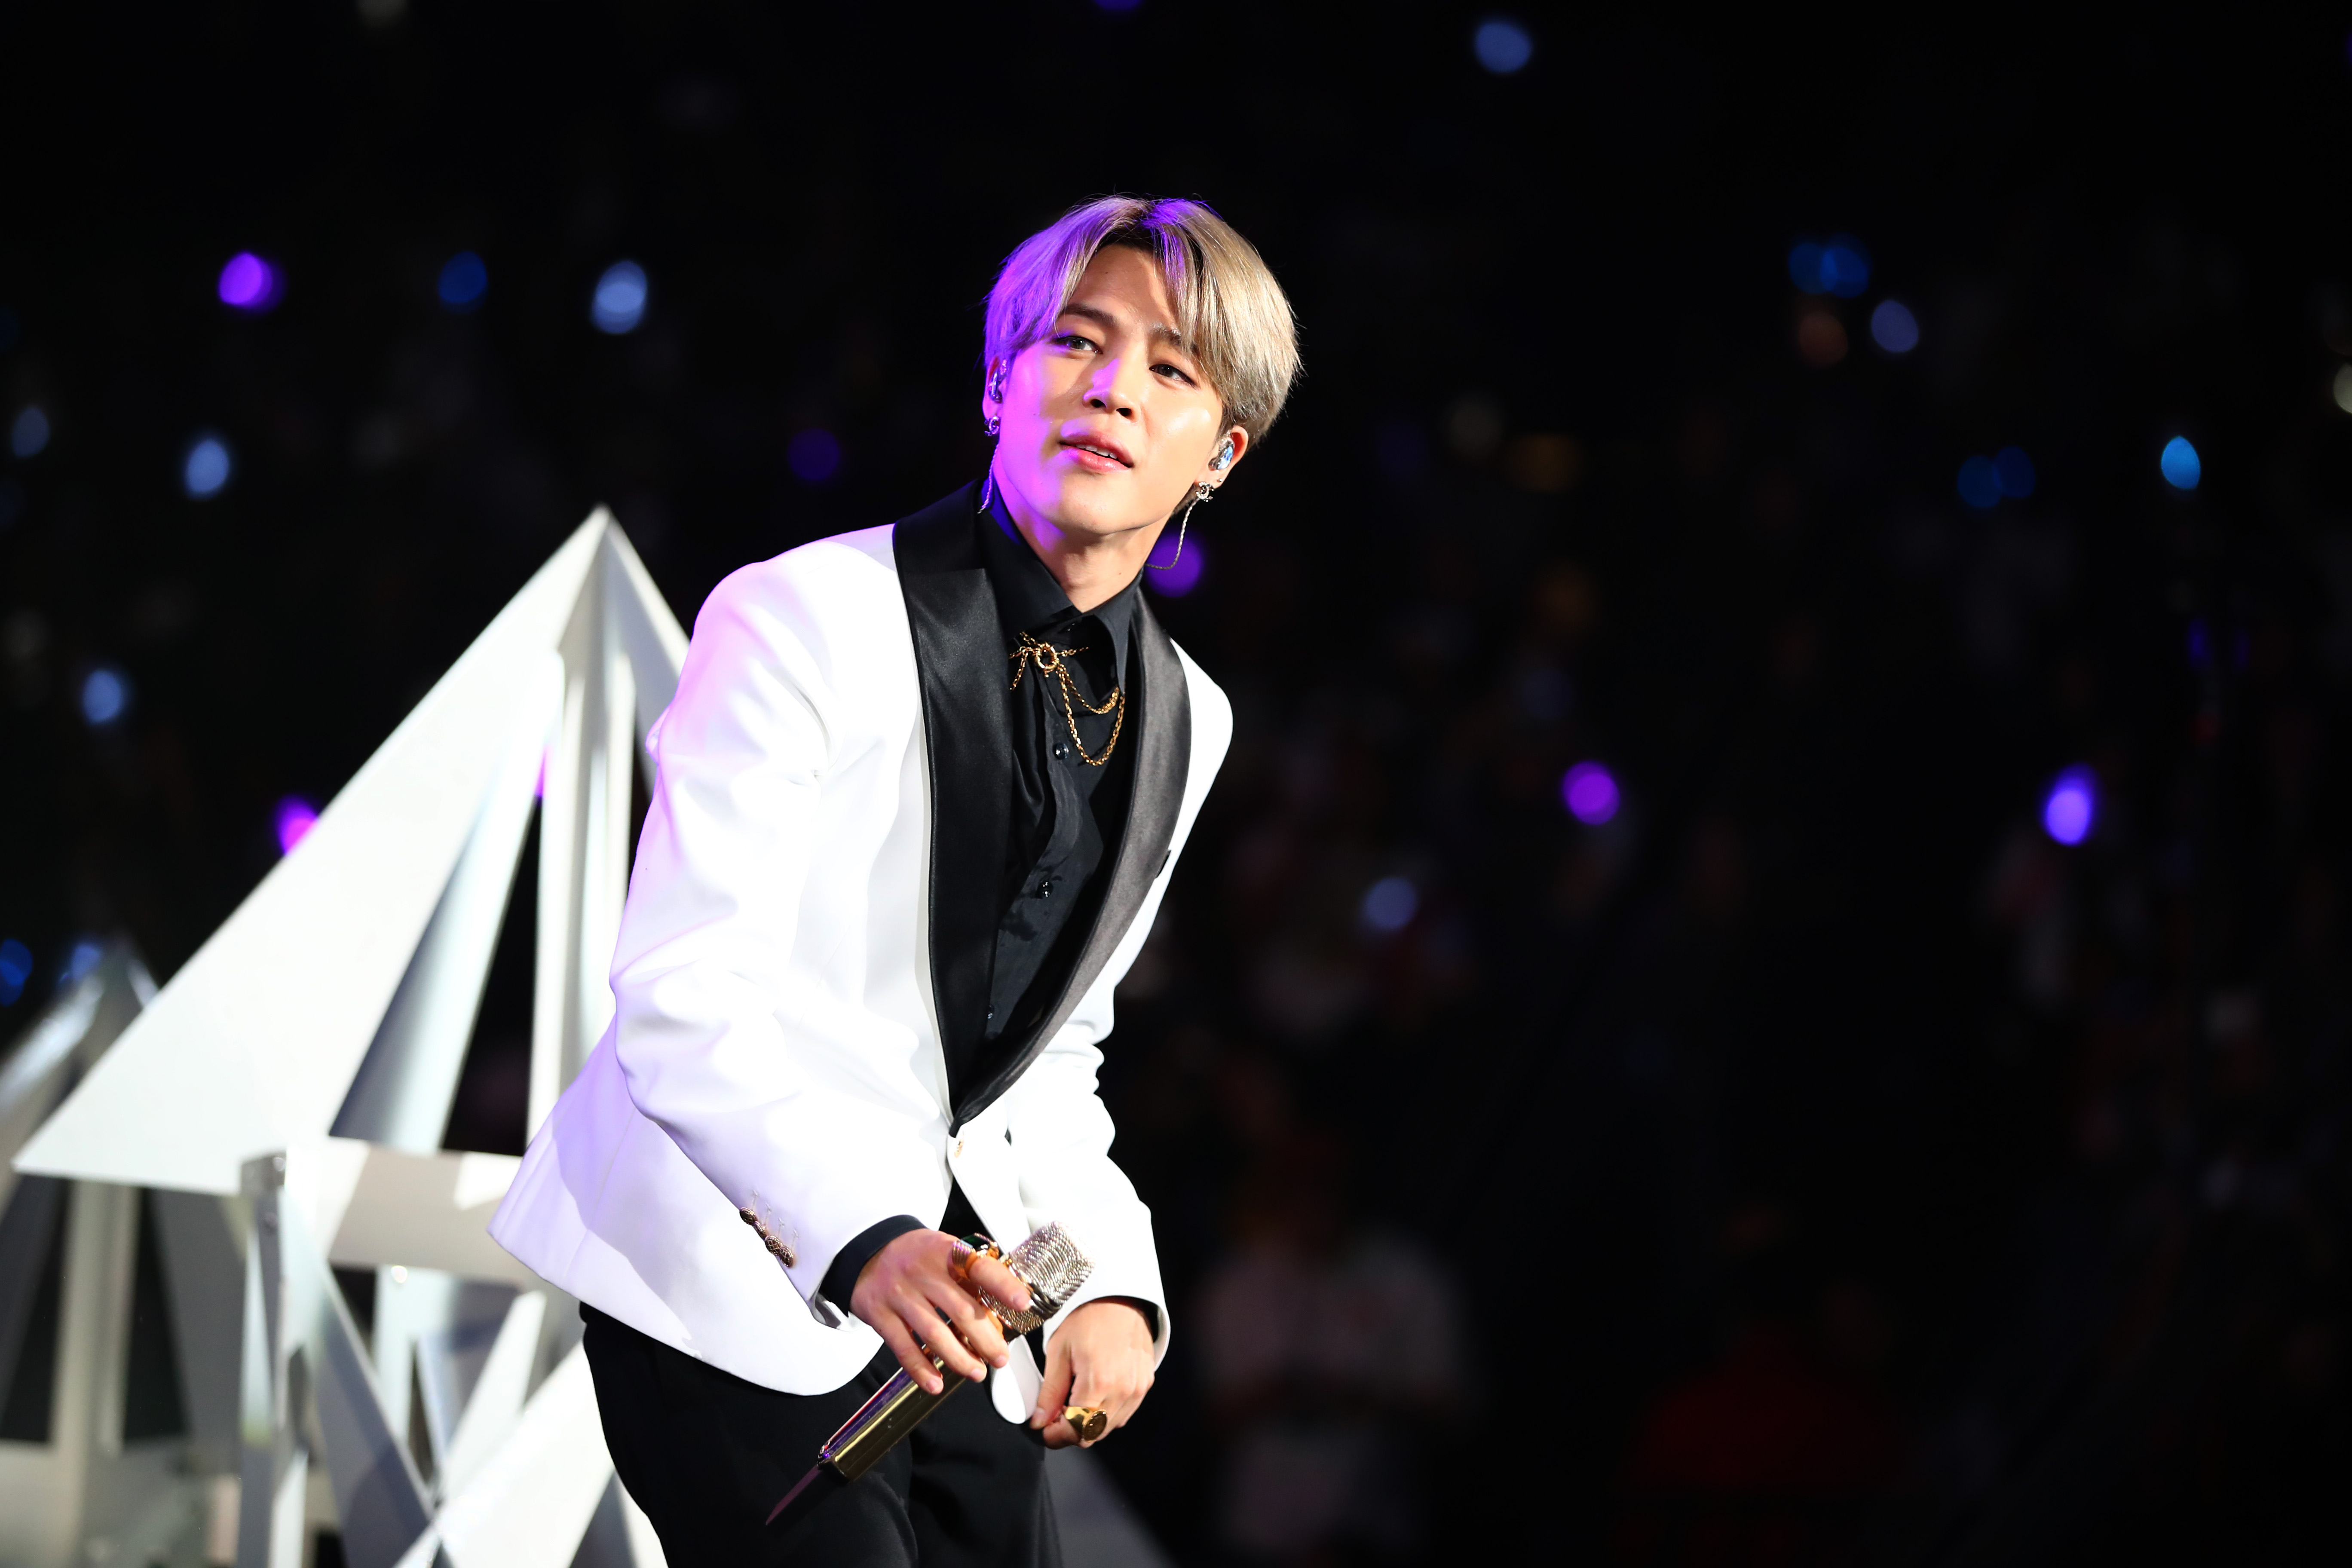 Jimin of BTS stands onstage at the 102.7 KIIS FM's Jingle Ball 2019